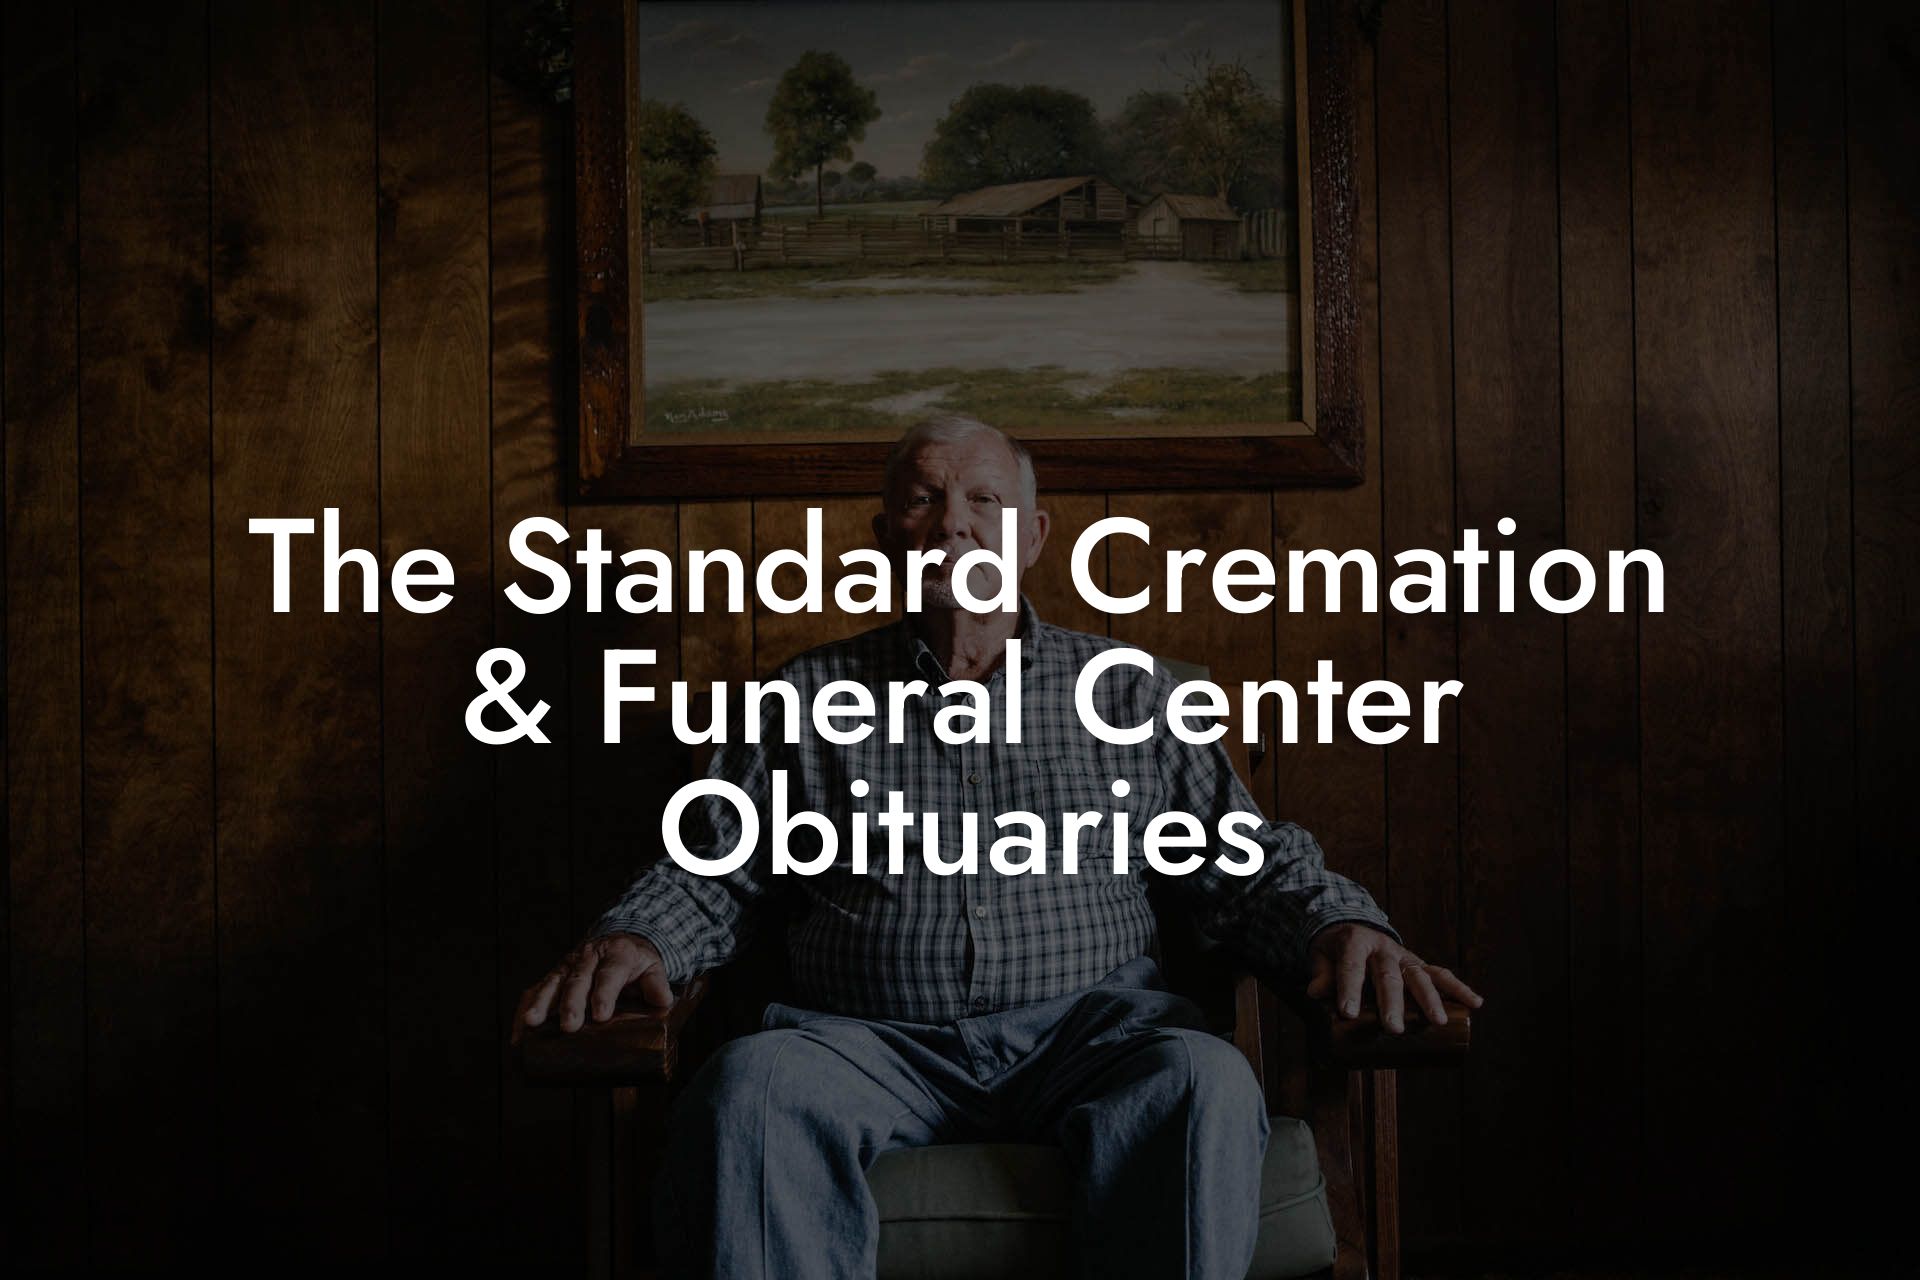 The Standard Cremation & Funeral Center Obituaries